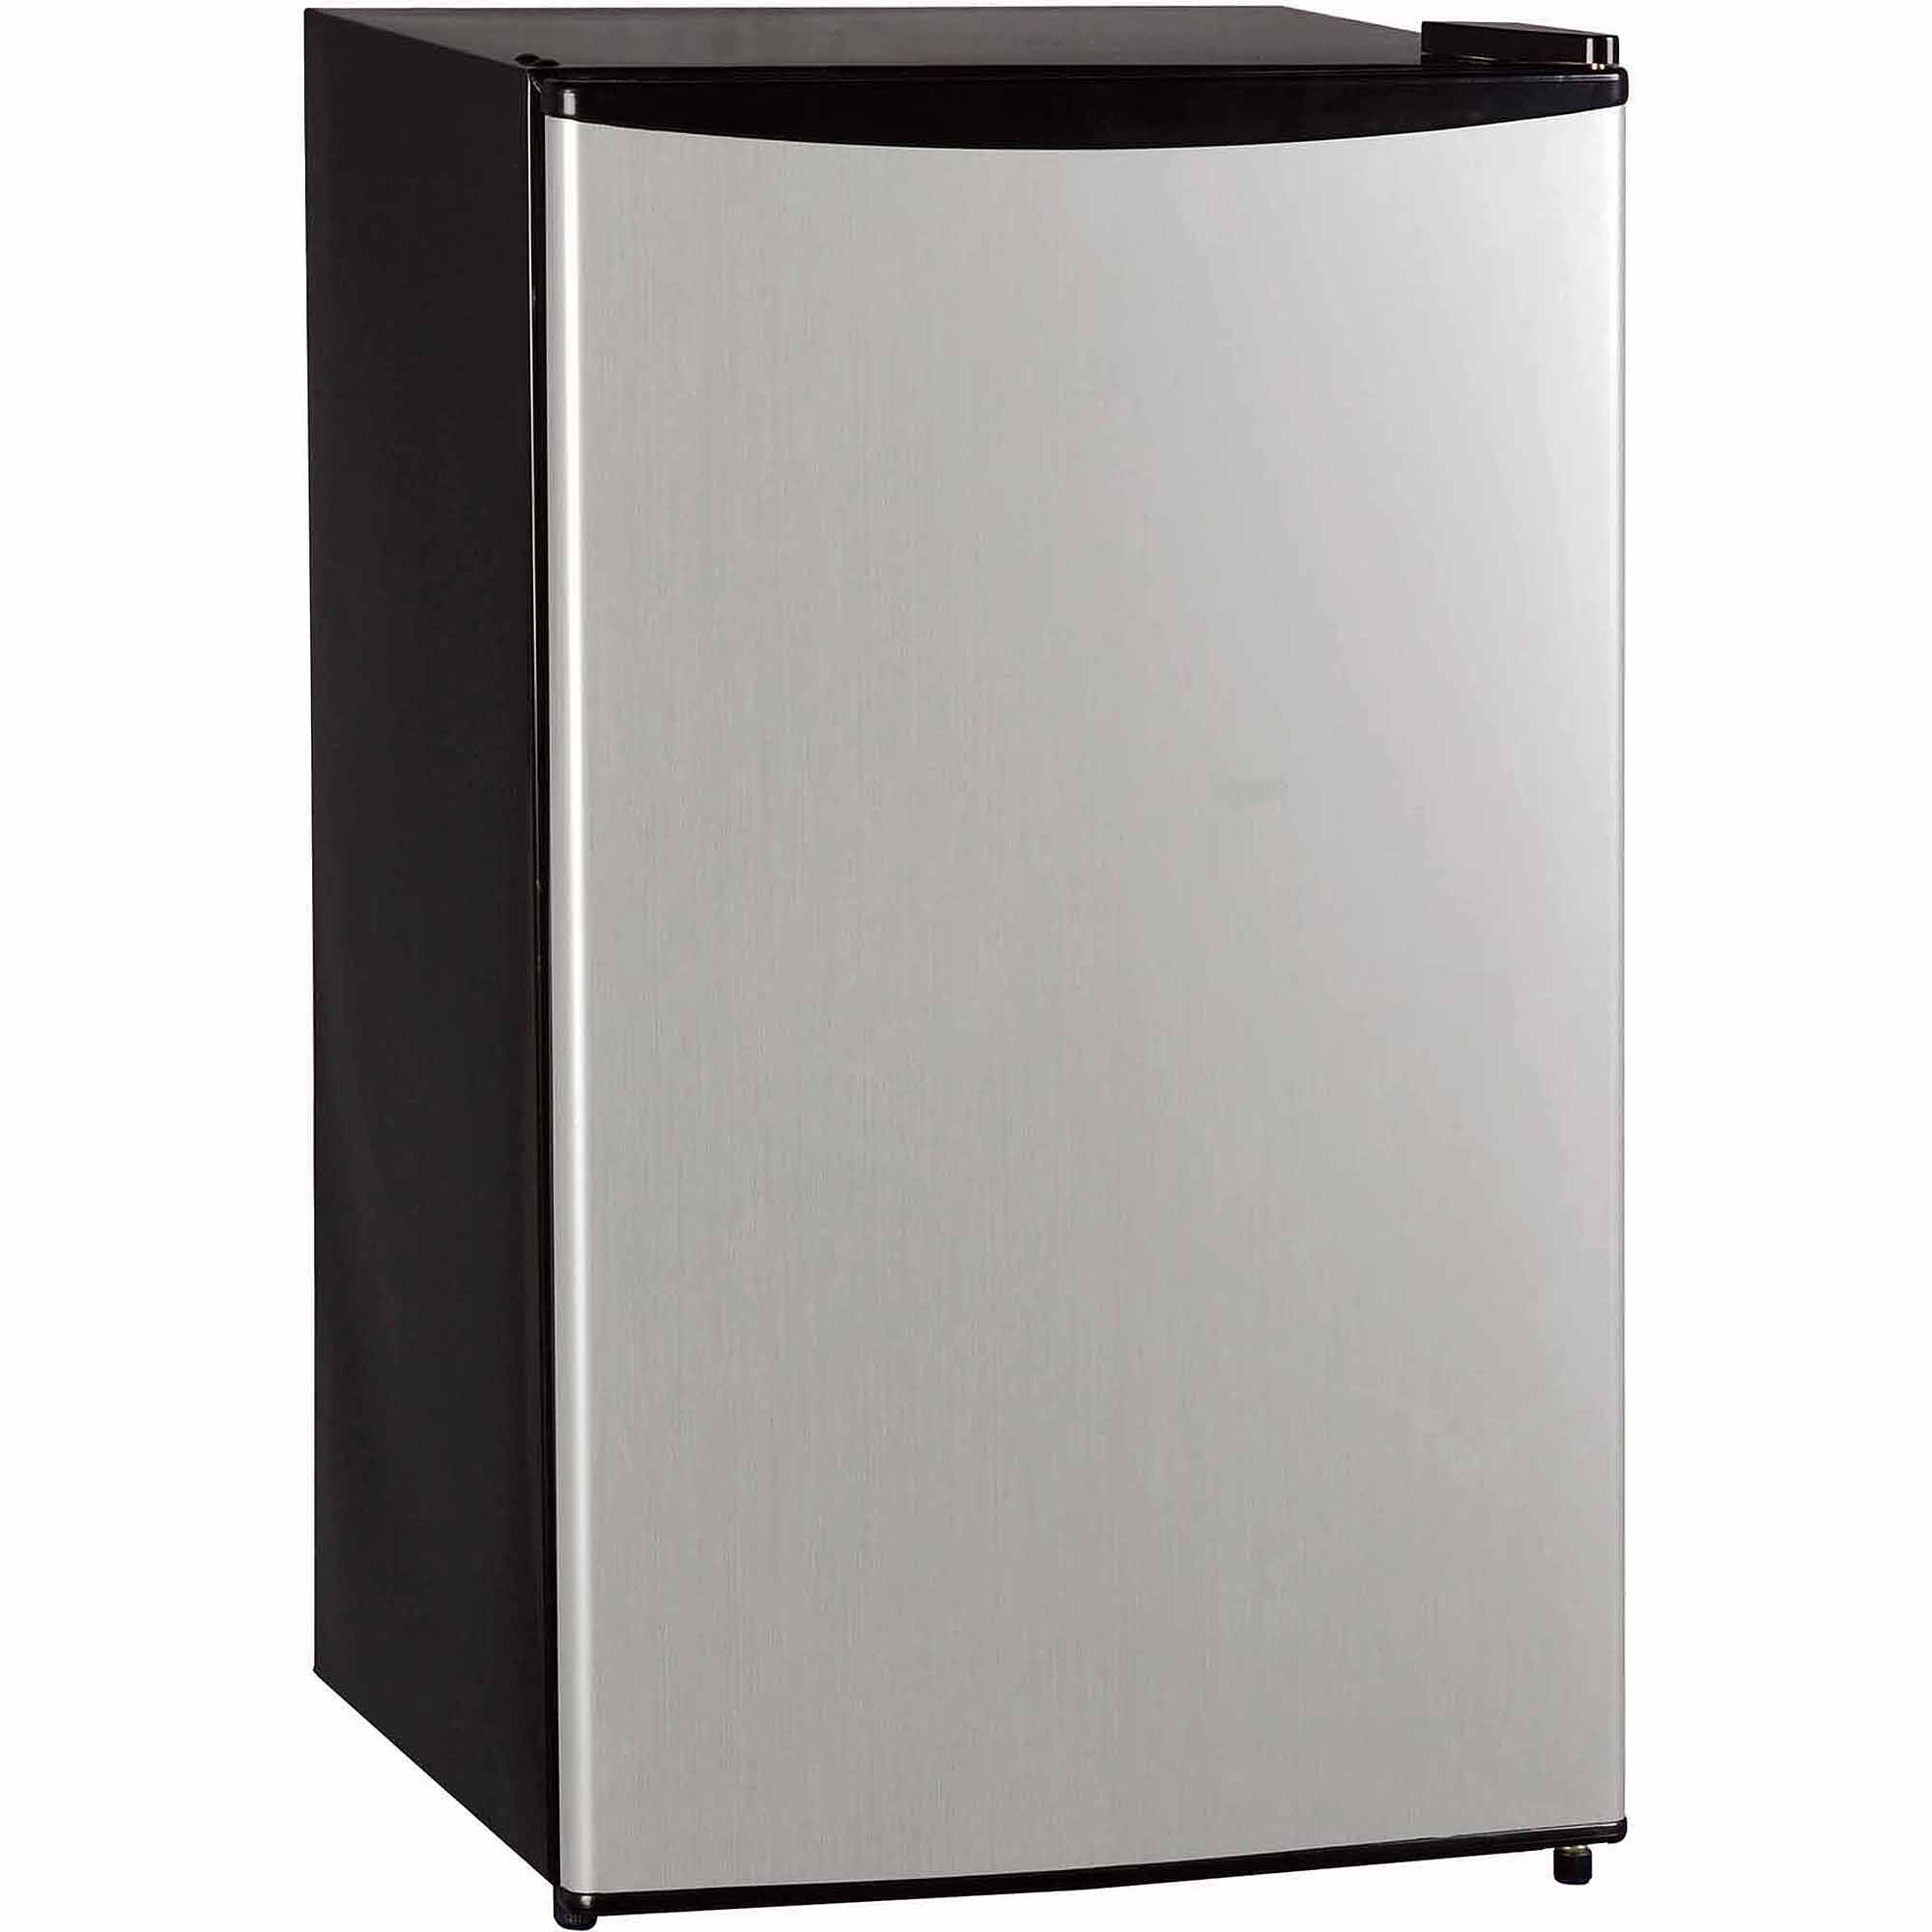 Midea 3.3 Cu Ft Compact Refrigerator WHS-121LSS1, Stainless Steel - image 1 of 4